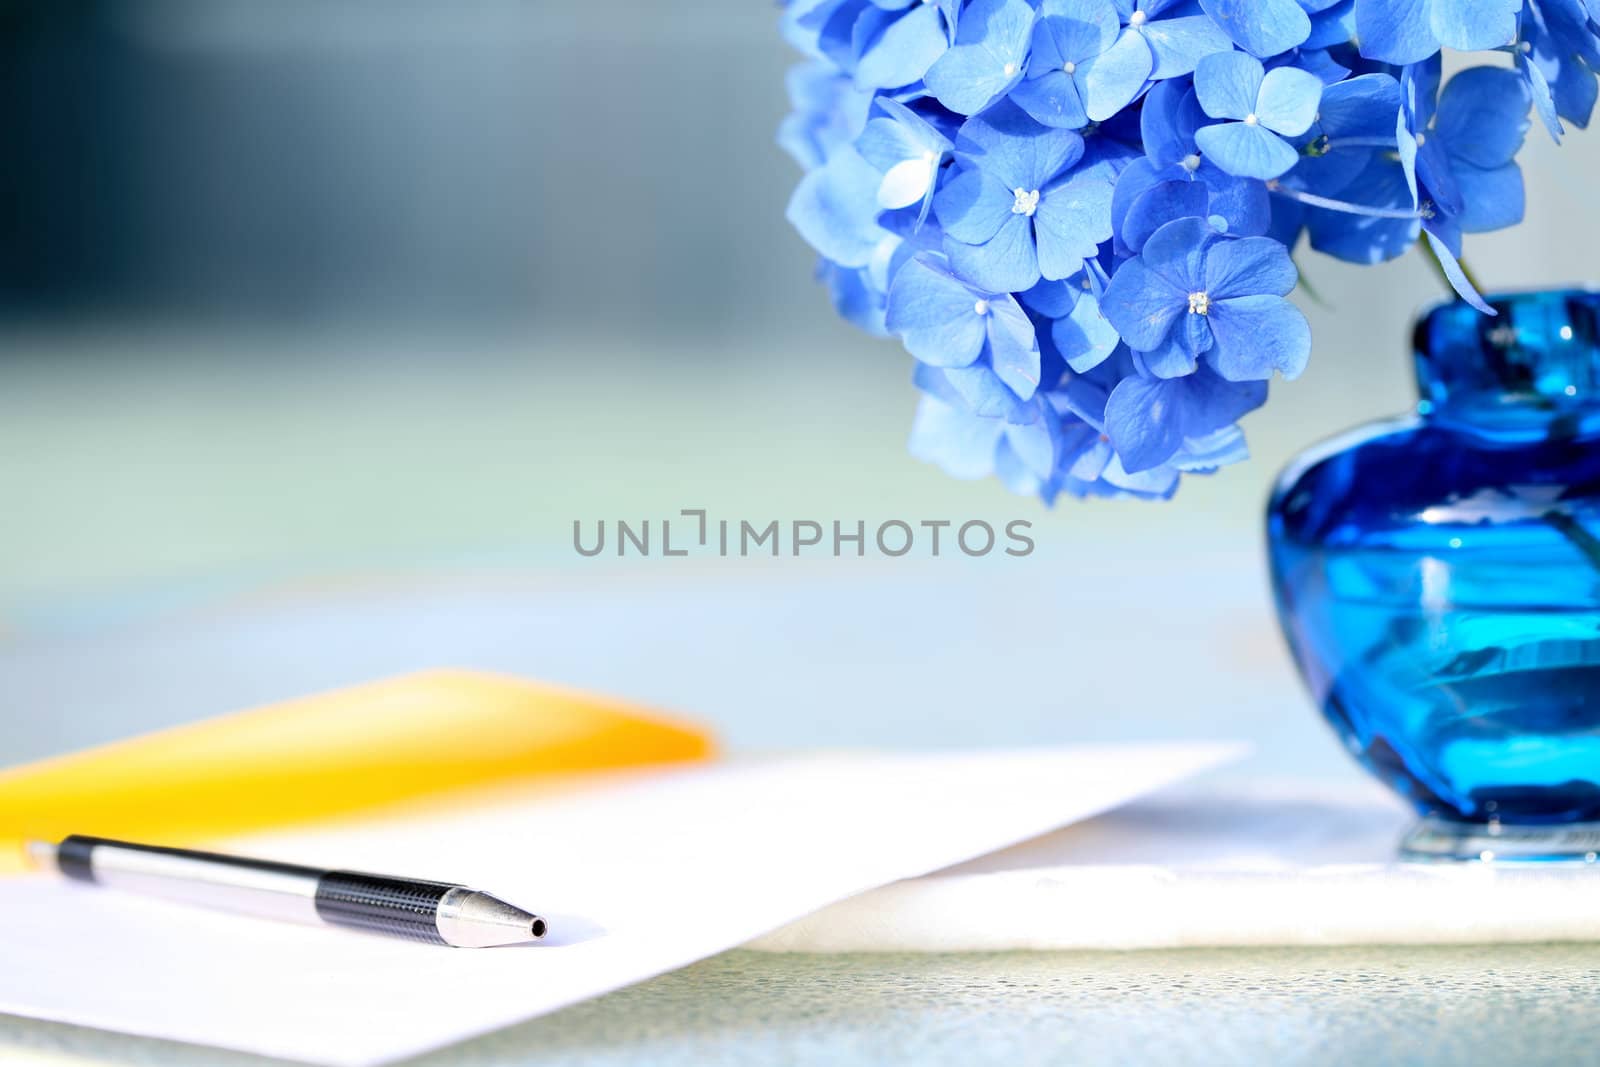 Blue hydrangea flower next to pen and stationery, in a calm yell by jarenwicklund